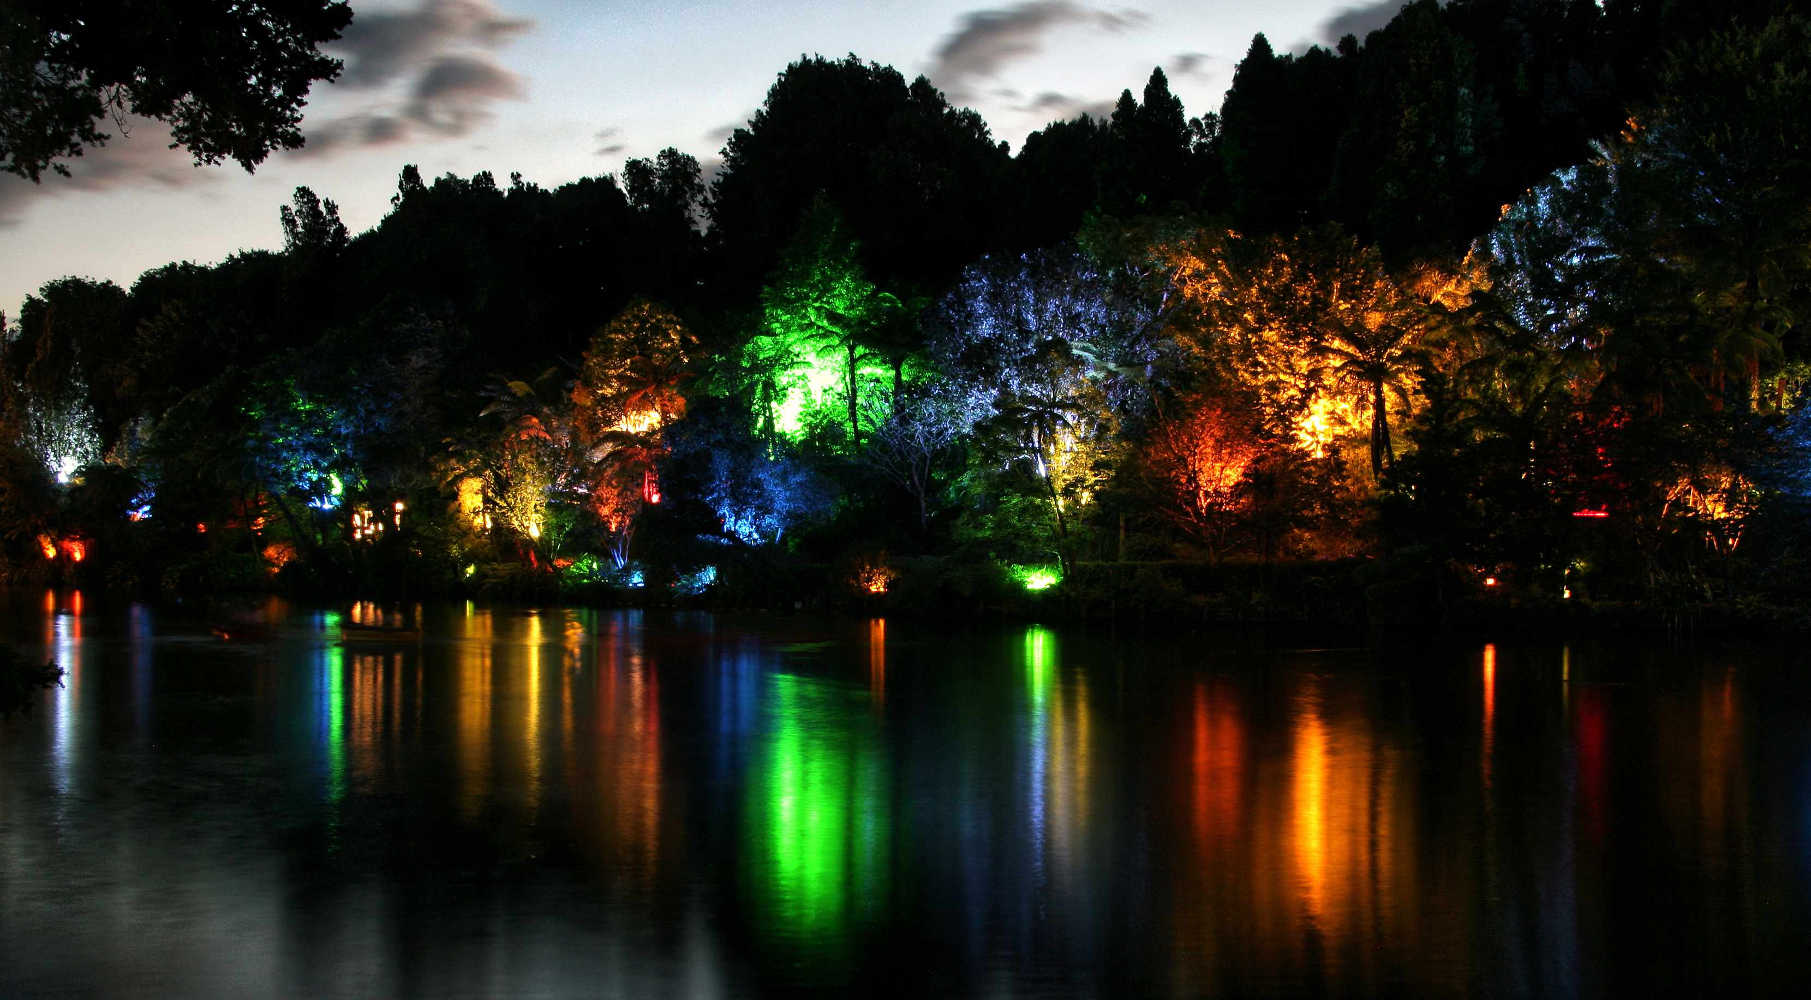 Festival of Light, New Plymouth, New Zealand